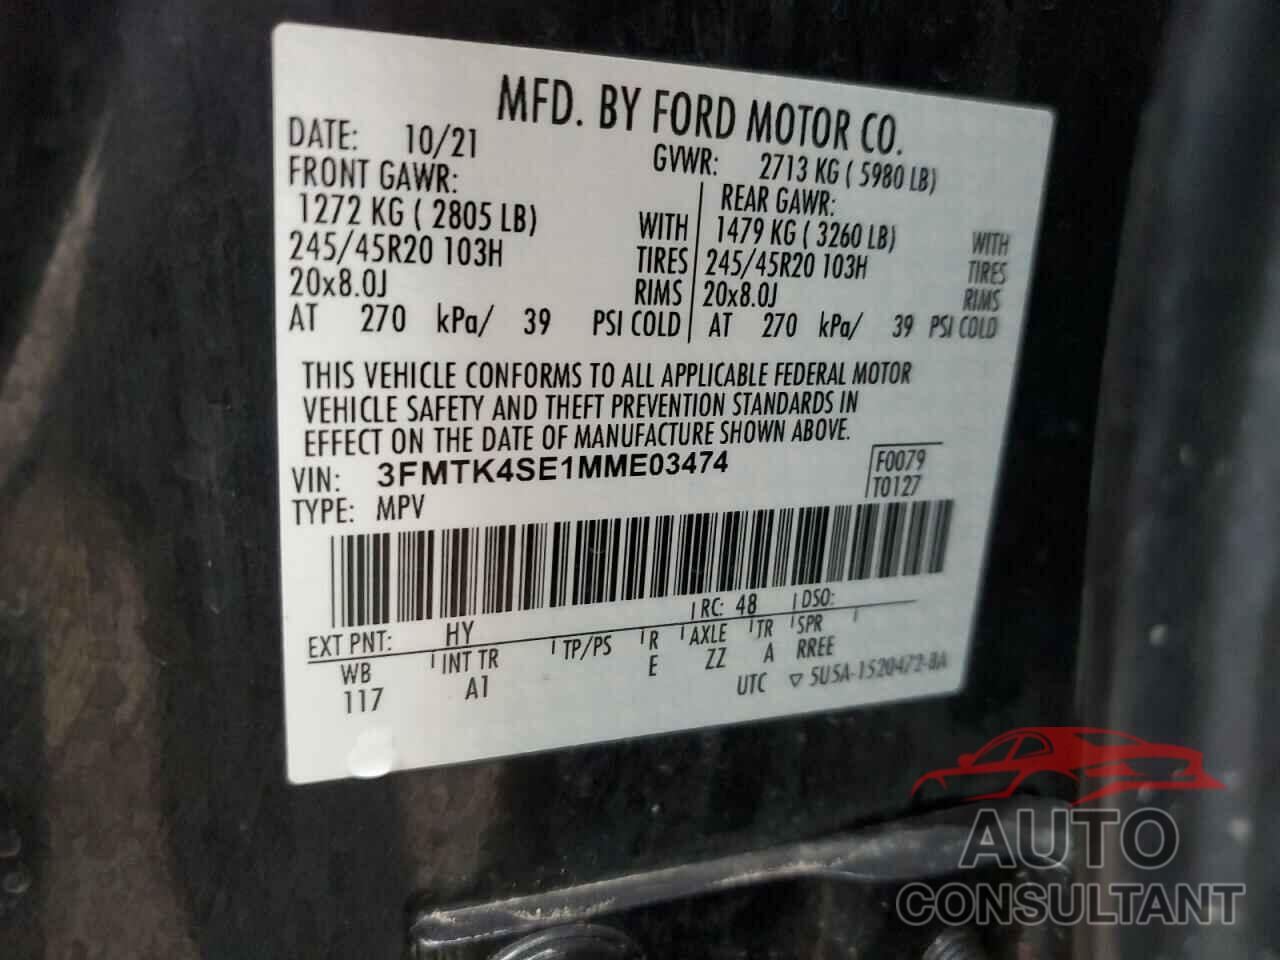 FORD MUSTANG 2021 - 3FMTK4SE1MME03474